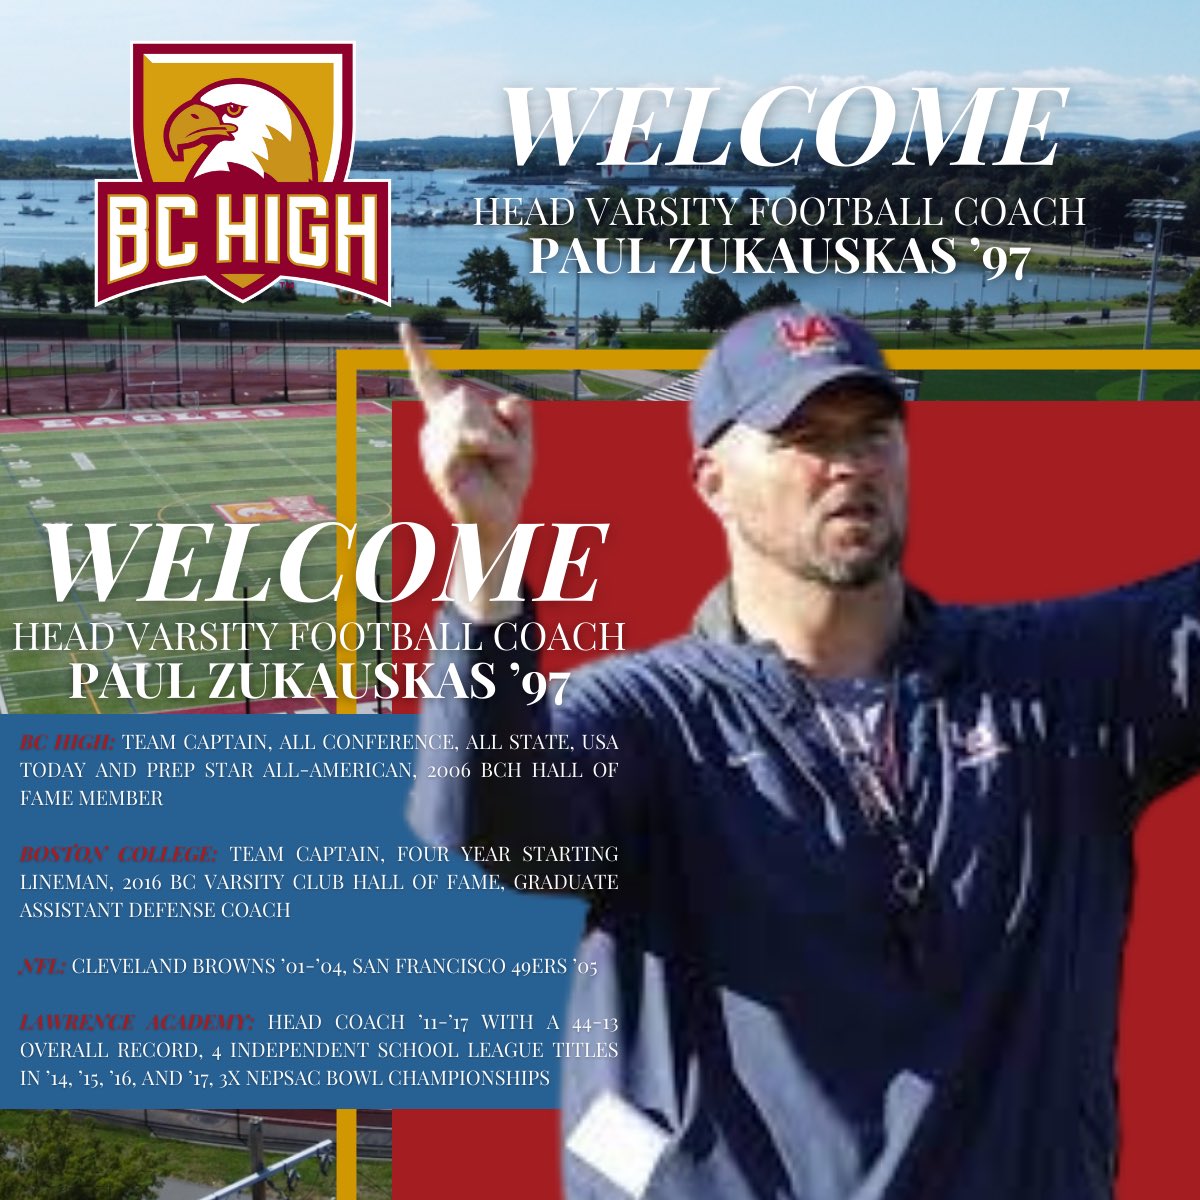 We are proud to welcome back Coach Z to BC High!